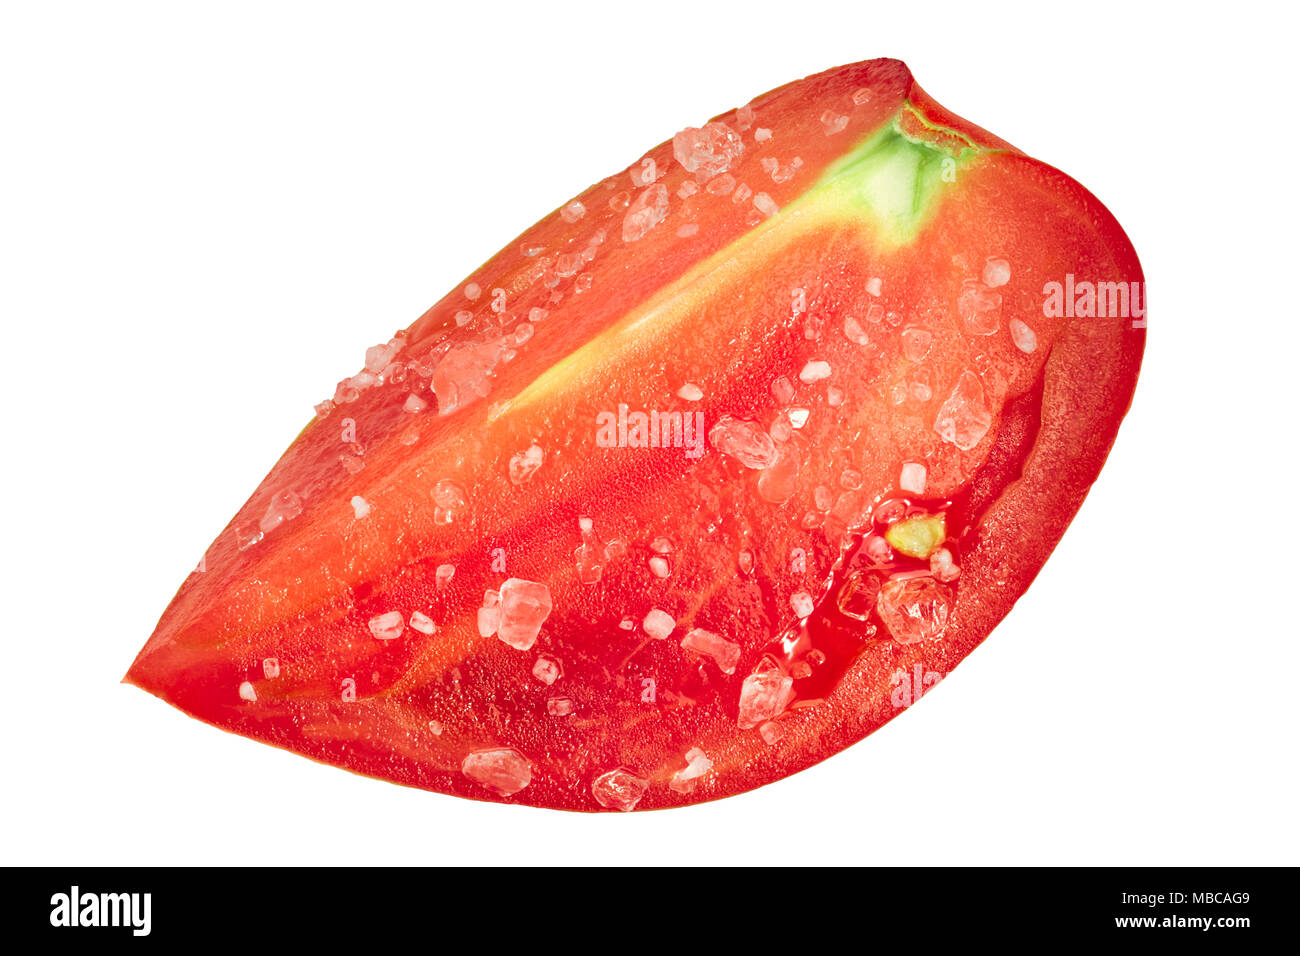 Slice or quarter of oxheart Cuor di bue tomato, salted, top view Stock Photo